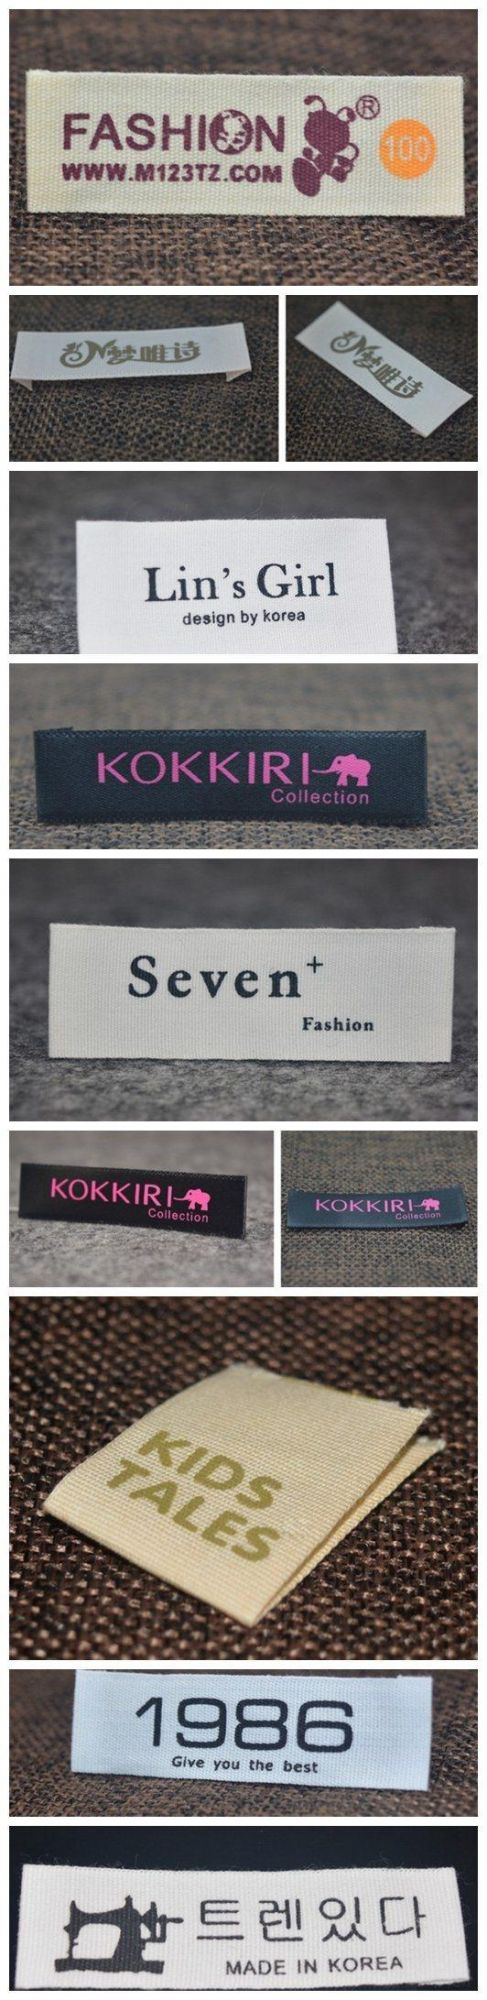 Fashion Design Garment Woven Main Label for Clothing